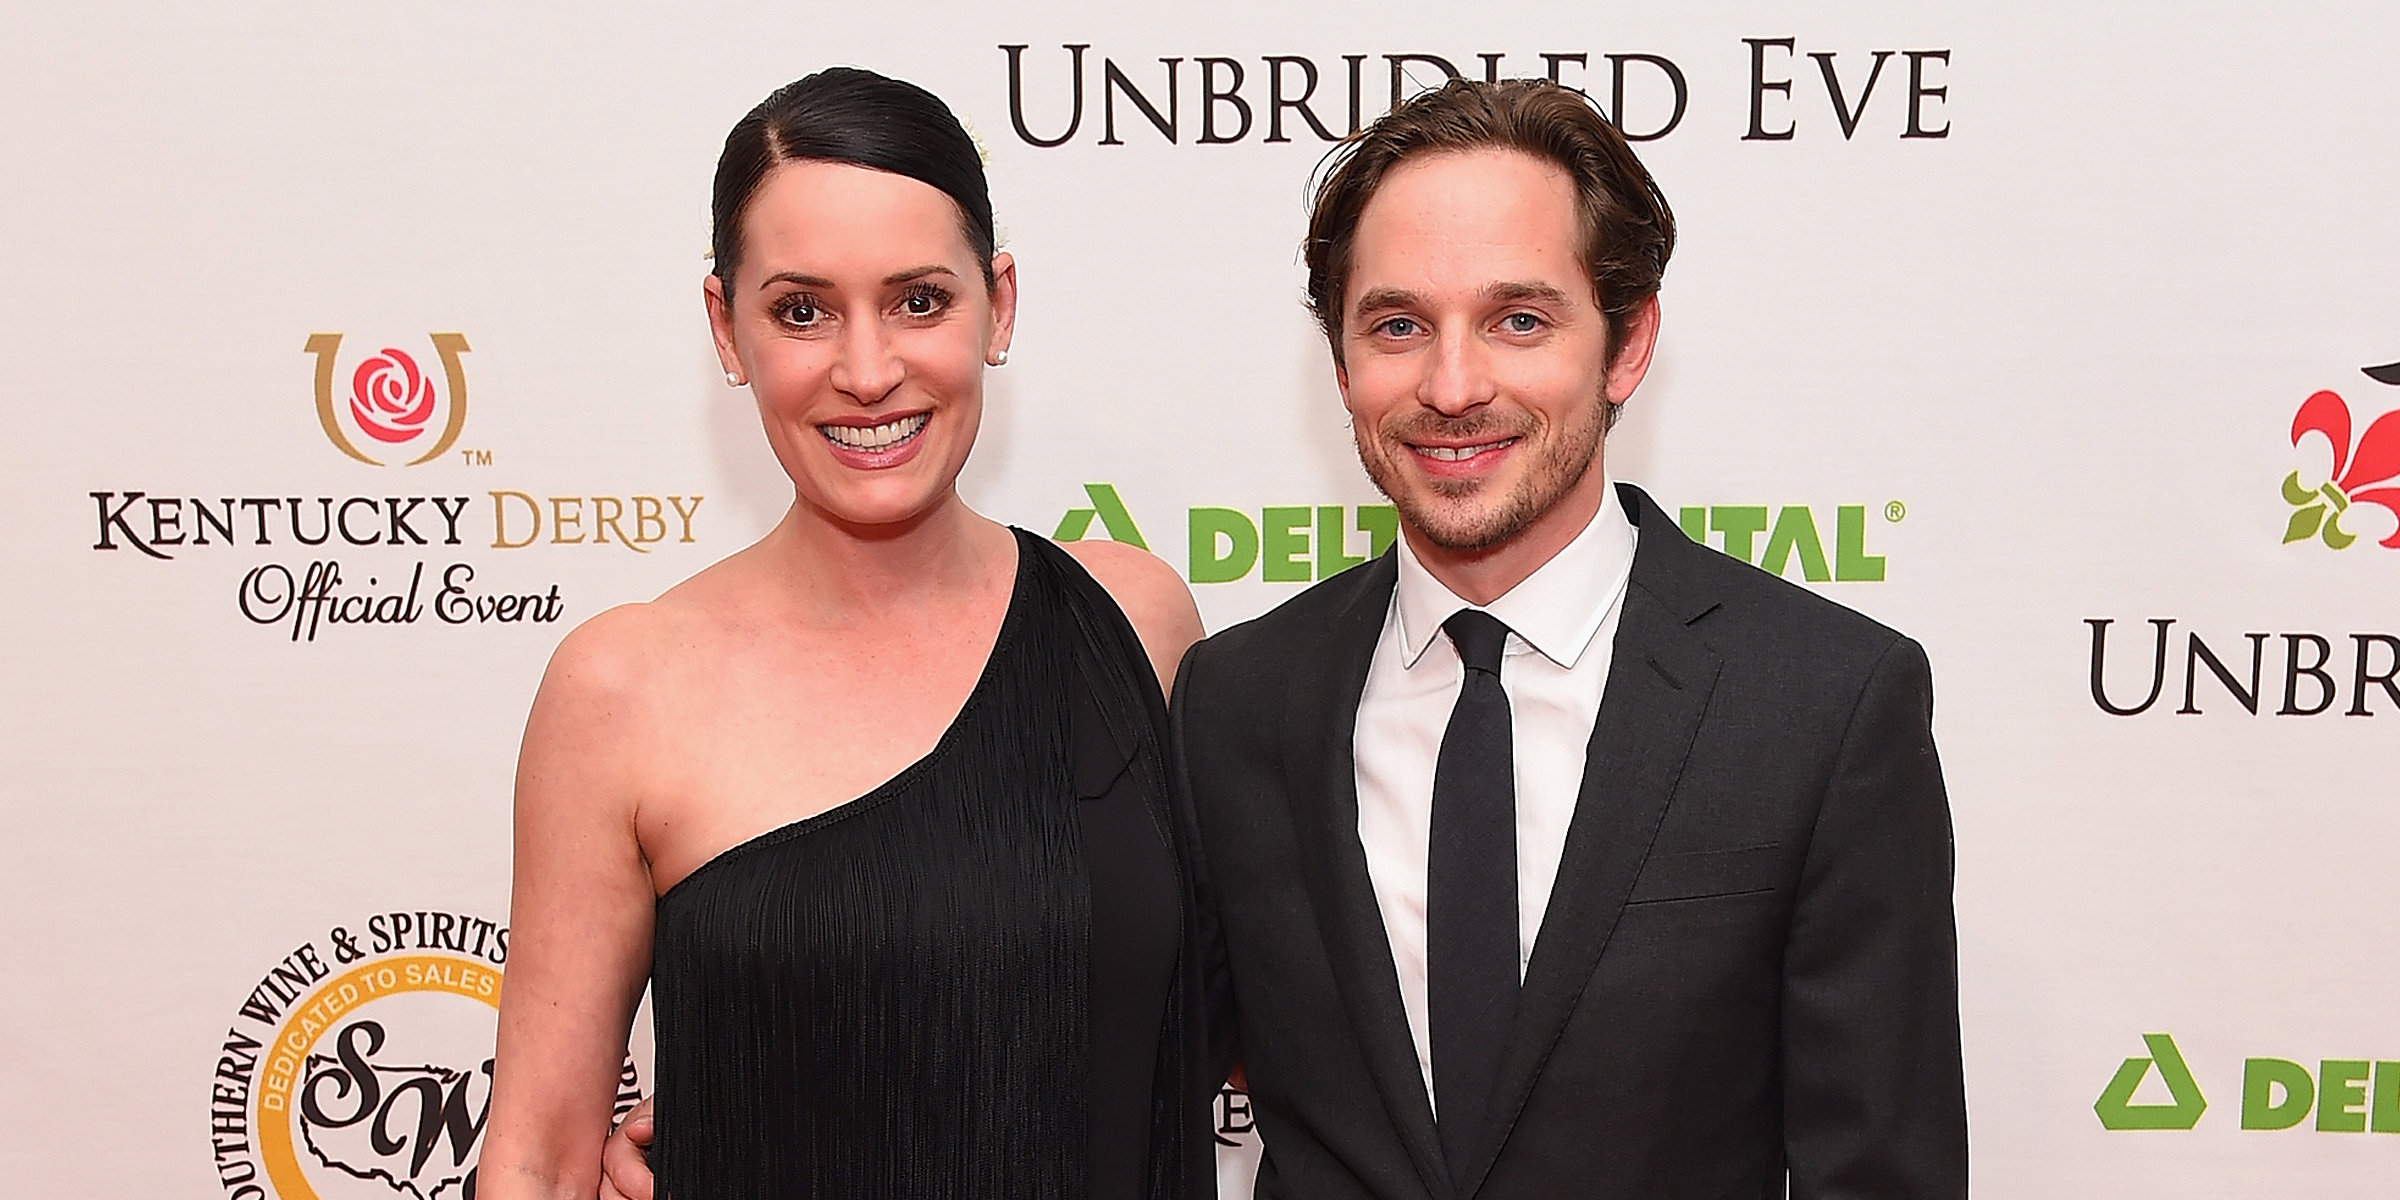 Paget Brewster and Steve Damstra | Source: Getty Images